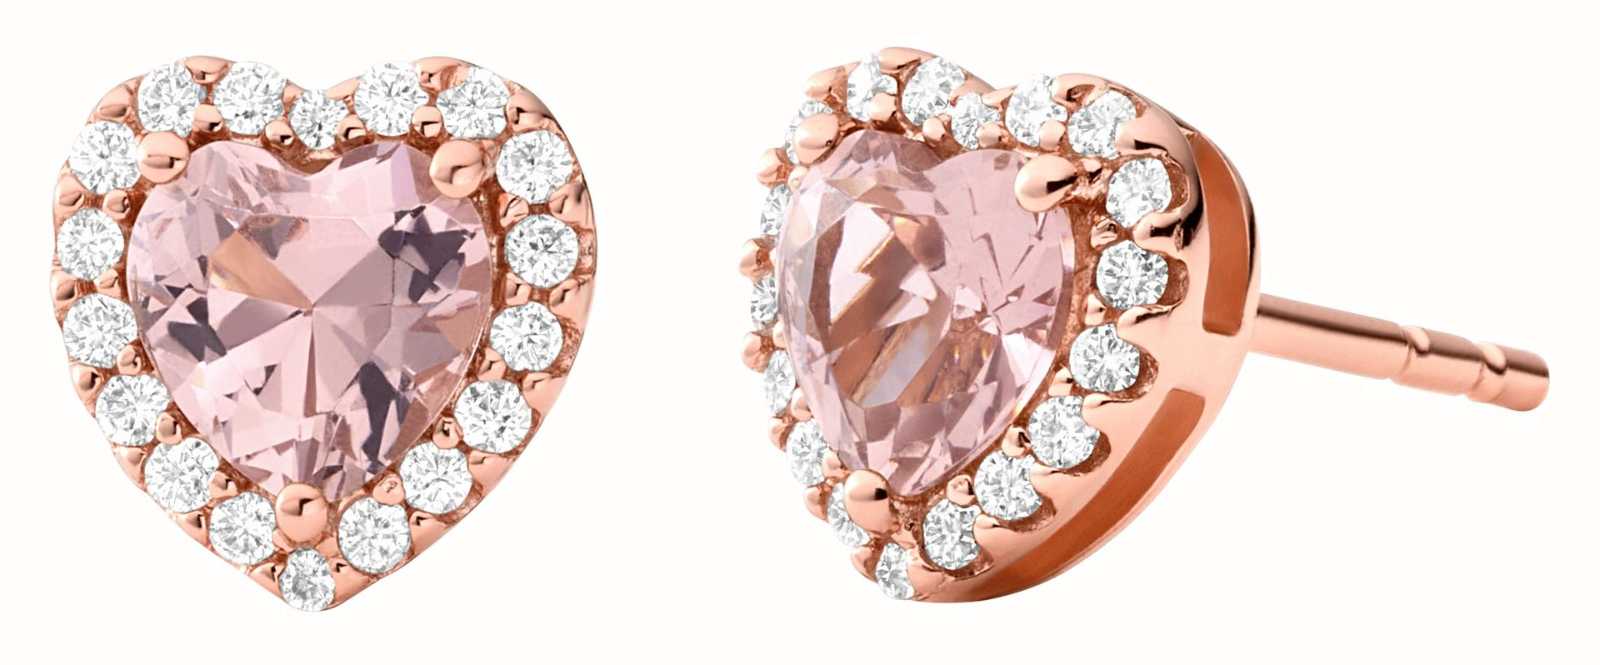 Michael Kors Sterling Silver Open Heart Stud Earrings Available in Silver  14K RoseGold Plated or 14K Gold Plated  Macys